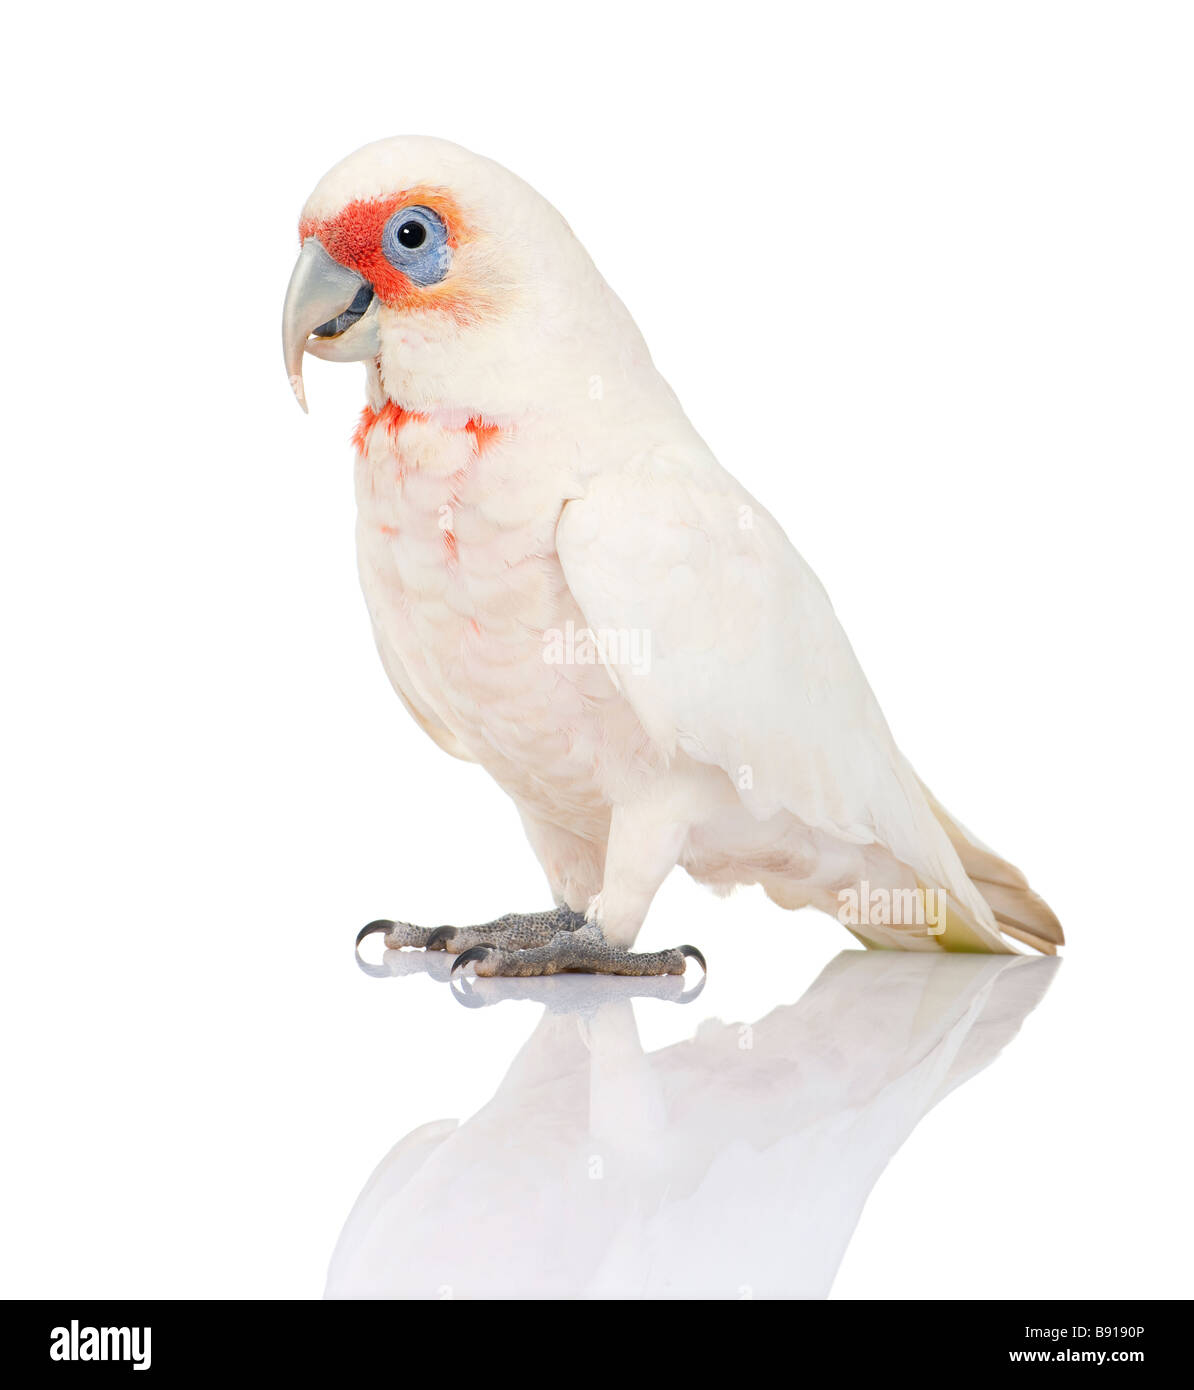 Long-billed Corella - Cacatua tenuirostris in front of a white background. Stock Photo